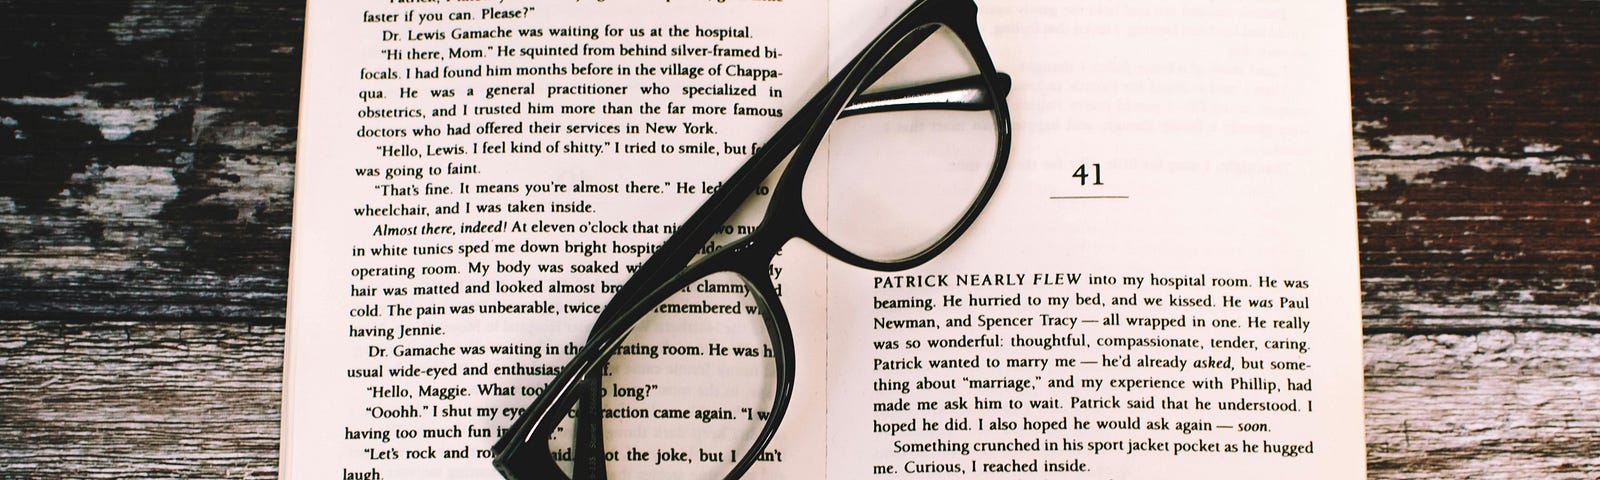 A pair of glasses on an open book.